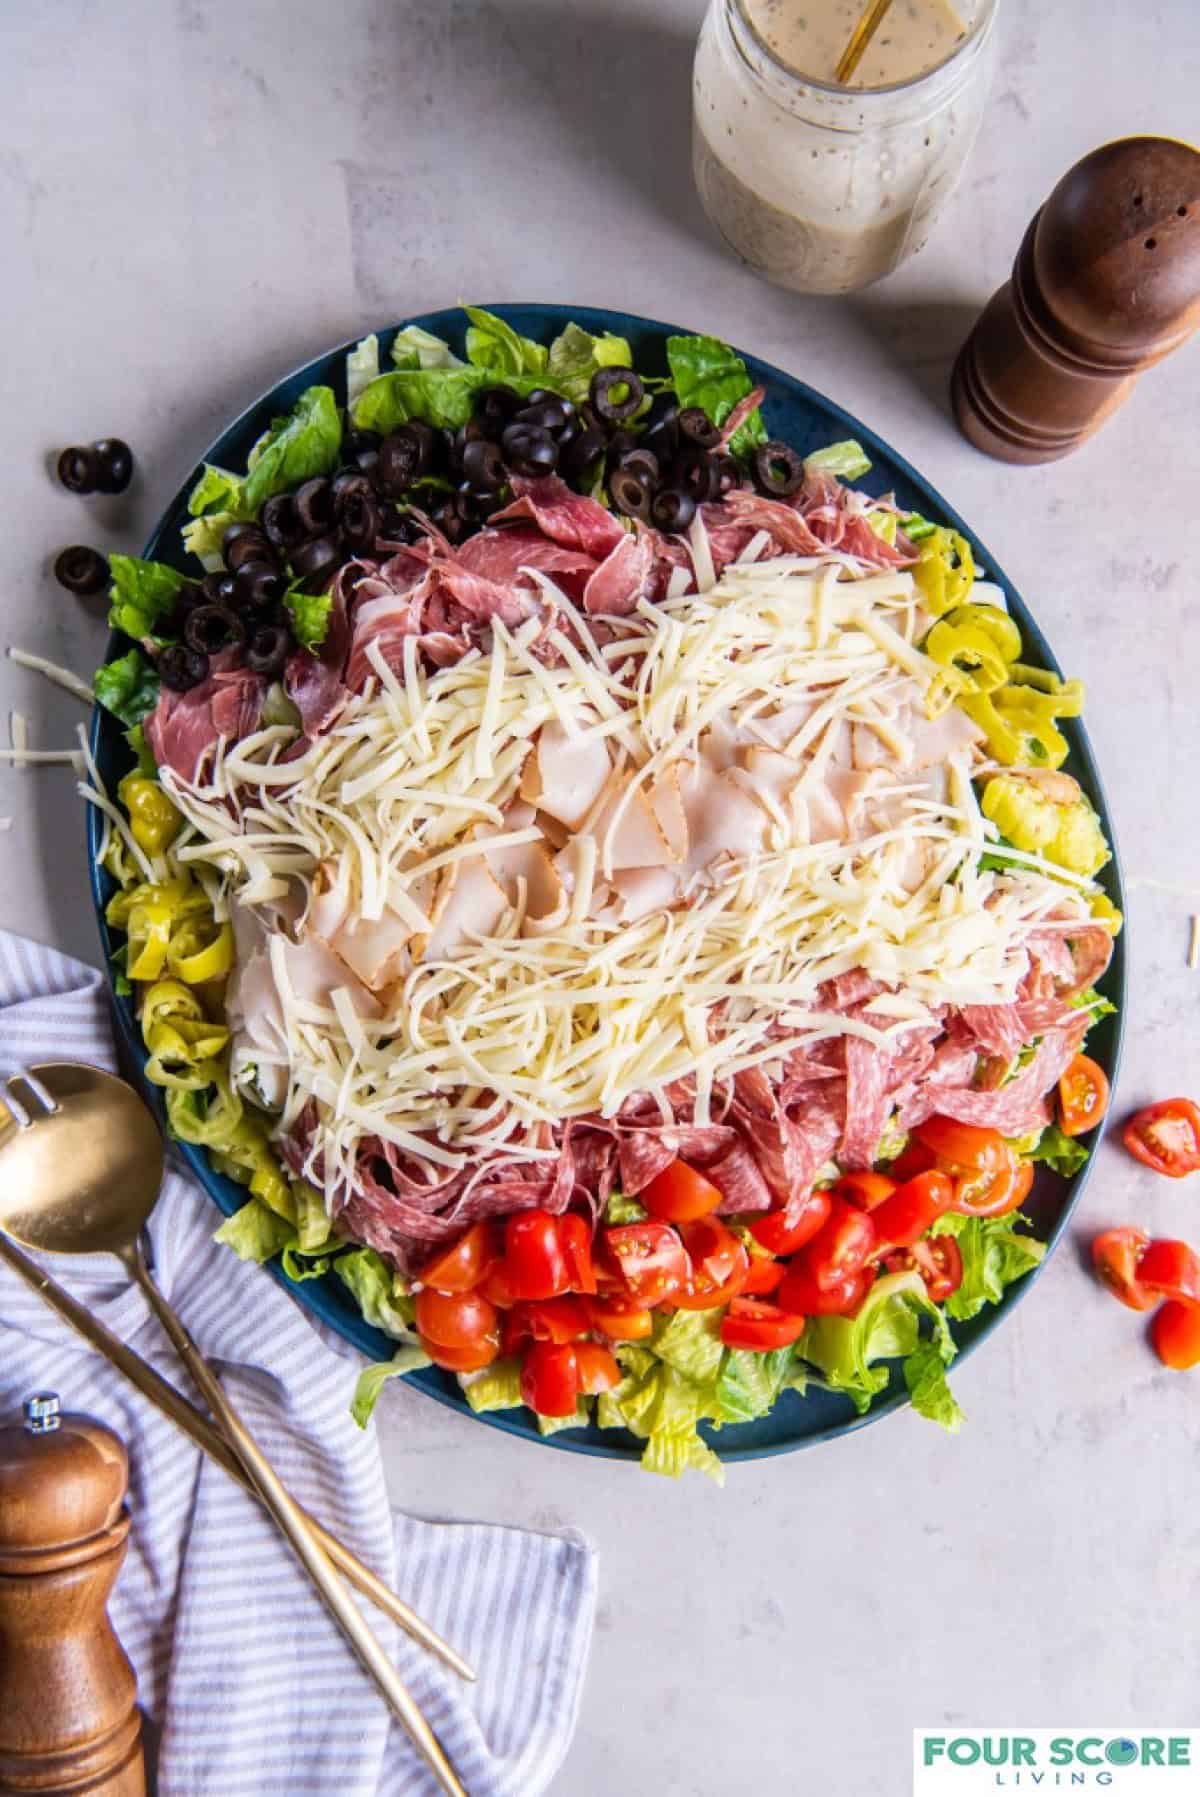 A fully prepared grinder salad on a plate, all ingredients layered including romaine lettuce, red cherry tomatoes, shredded cheese, sliced turkey, salami and capicola.